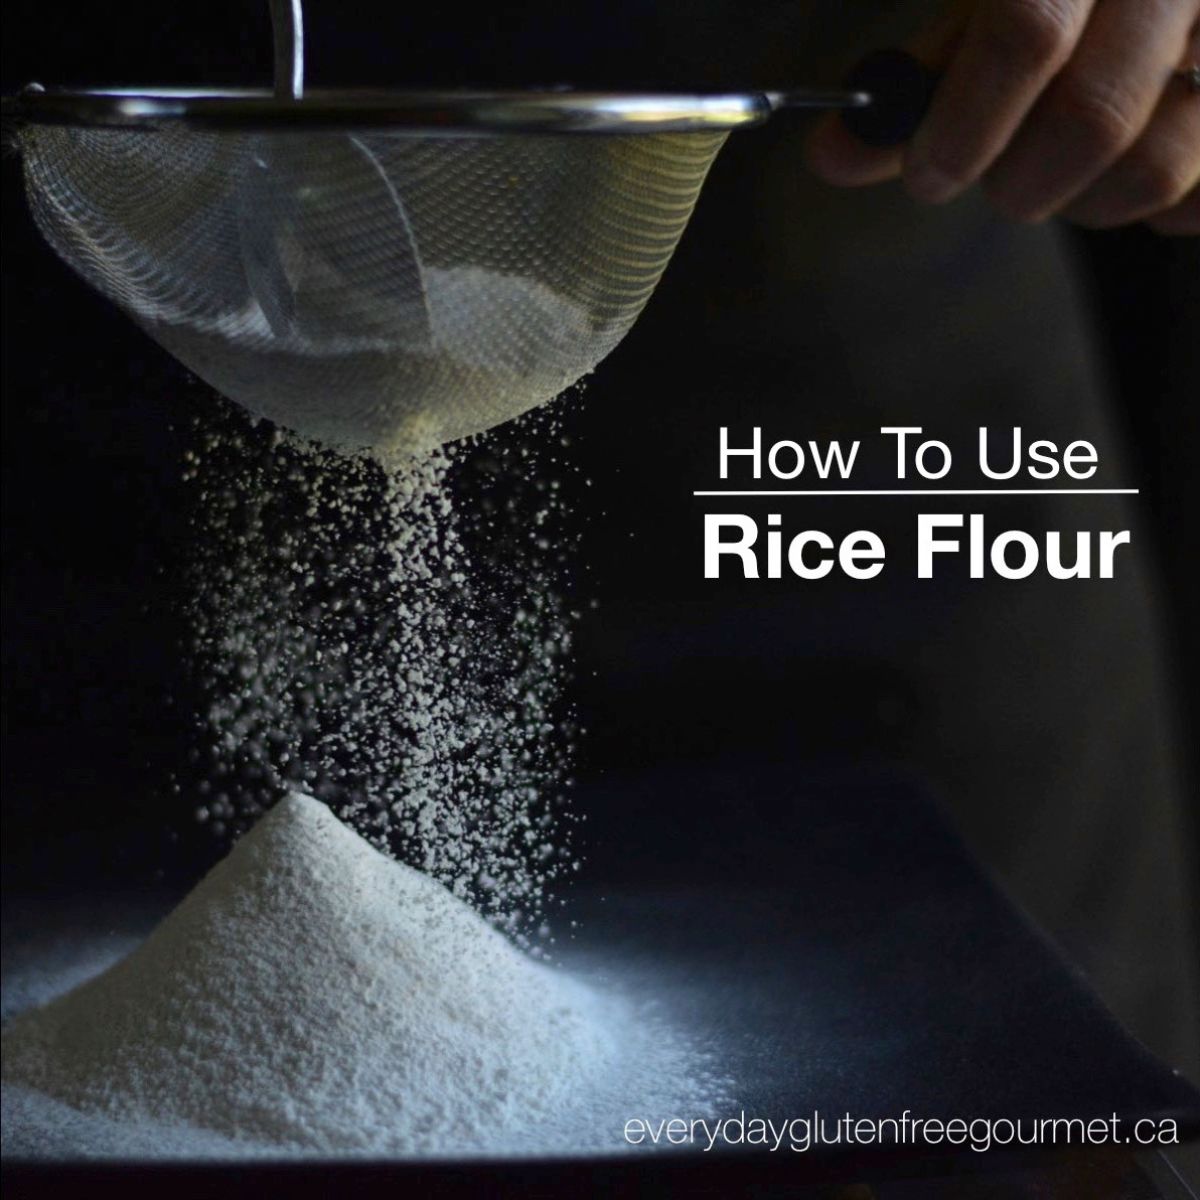 A sifter with rice flour coming out of it onto a pile of flour below.